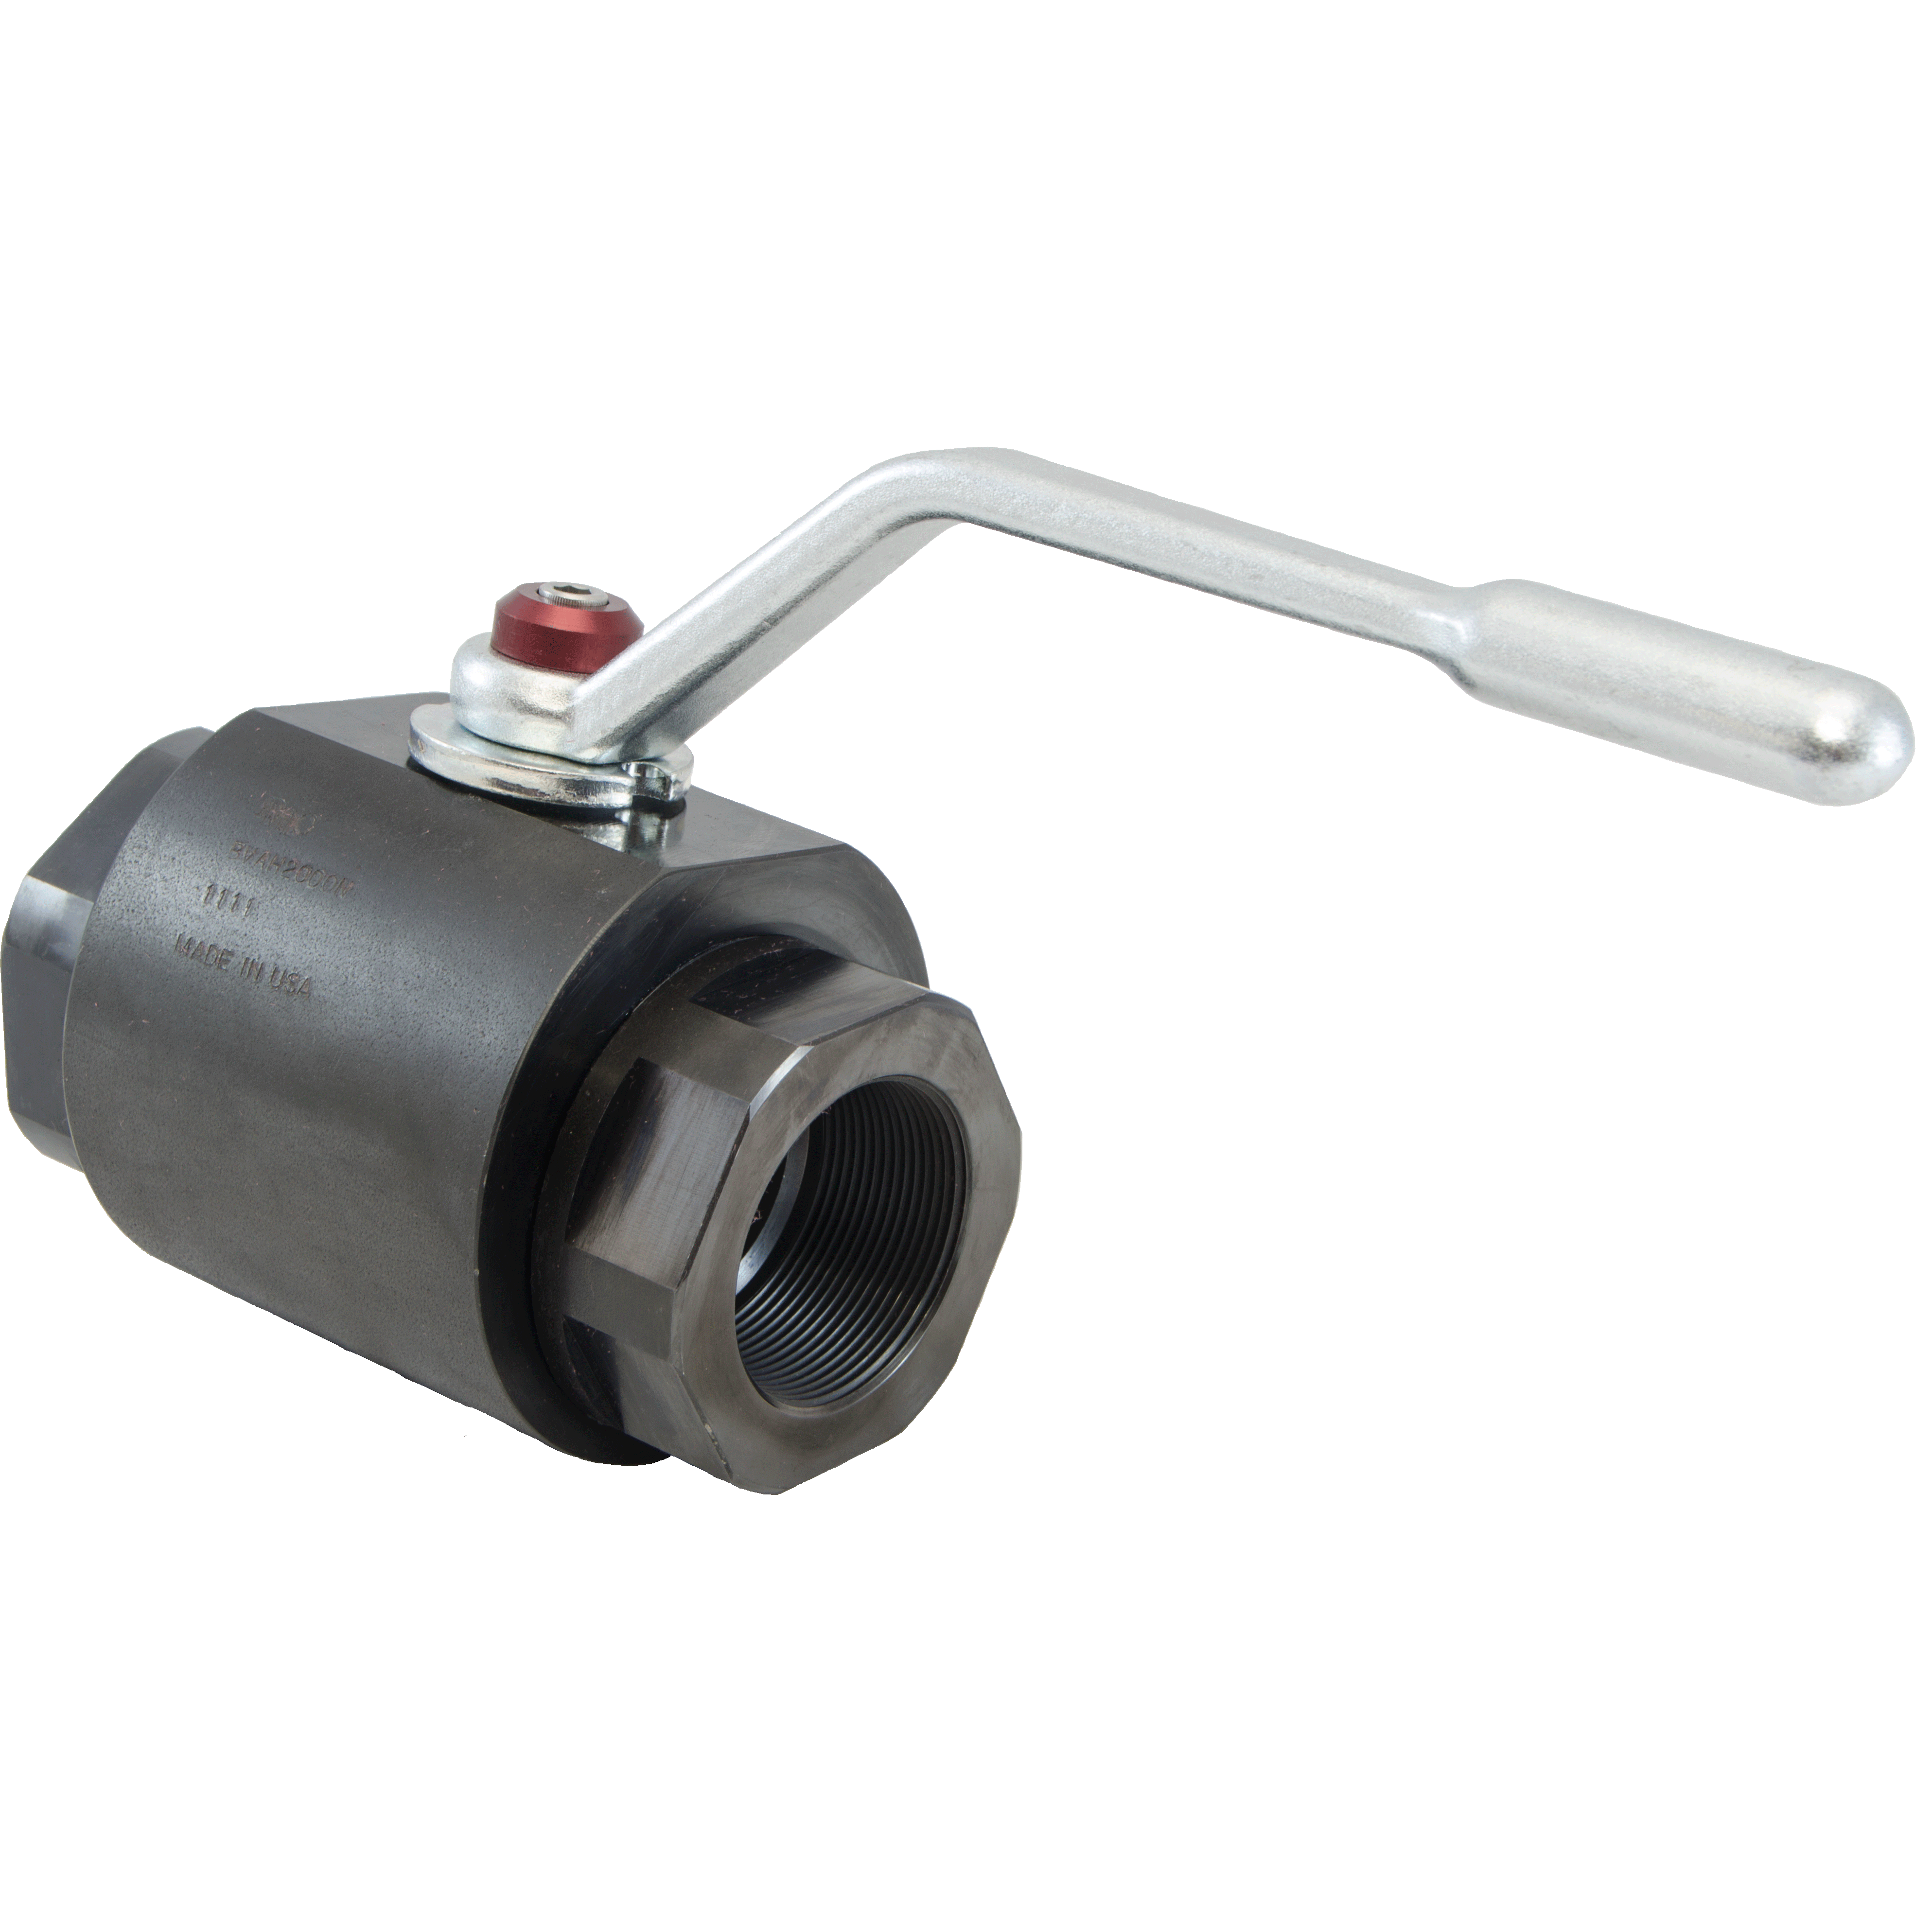 BVAH-1250S-1111 : DMIC Round Body Ball Valve, #20 SAE (1/4), Carbon Steel, 6000psi, Two-Way